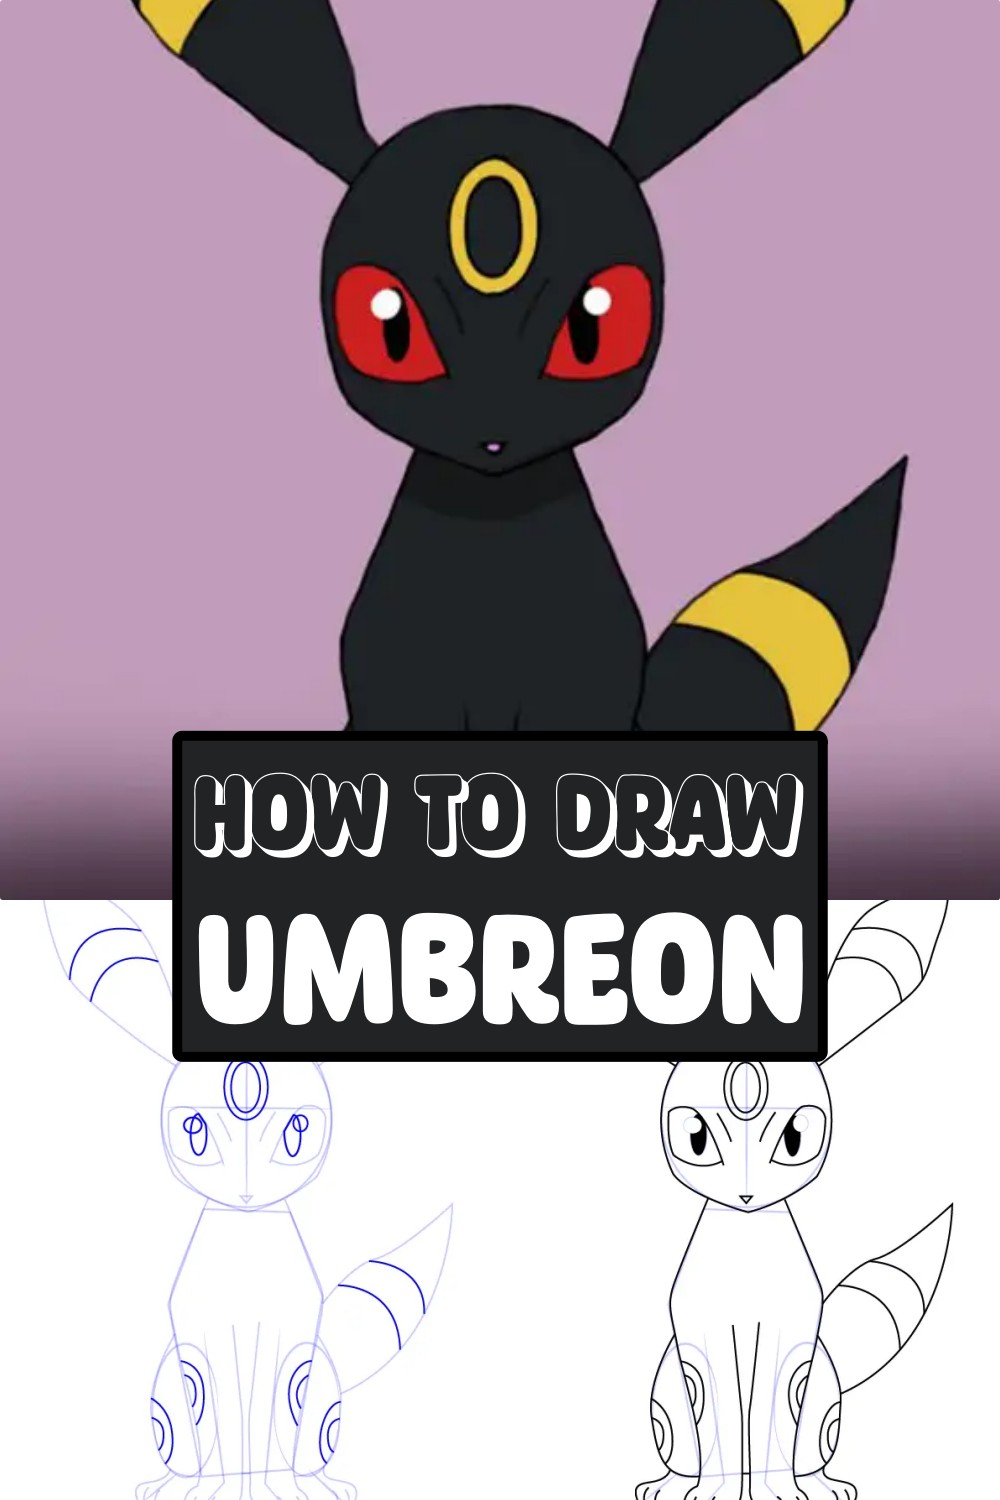 How To Draw Umbreon